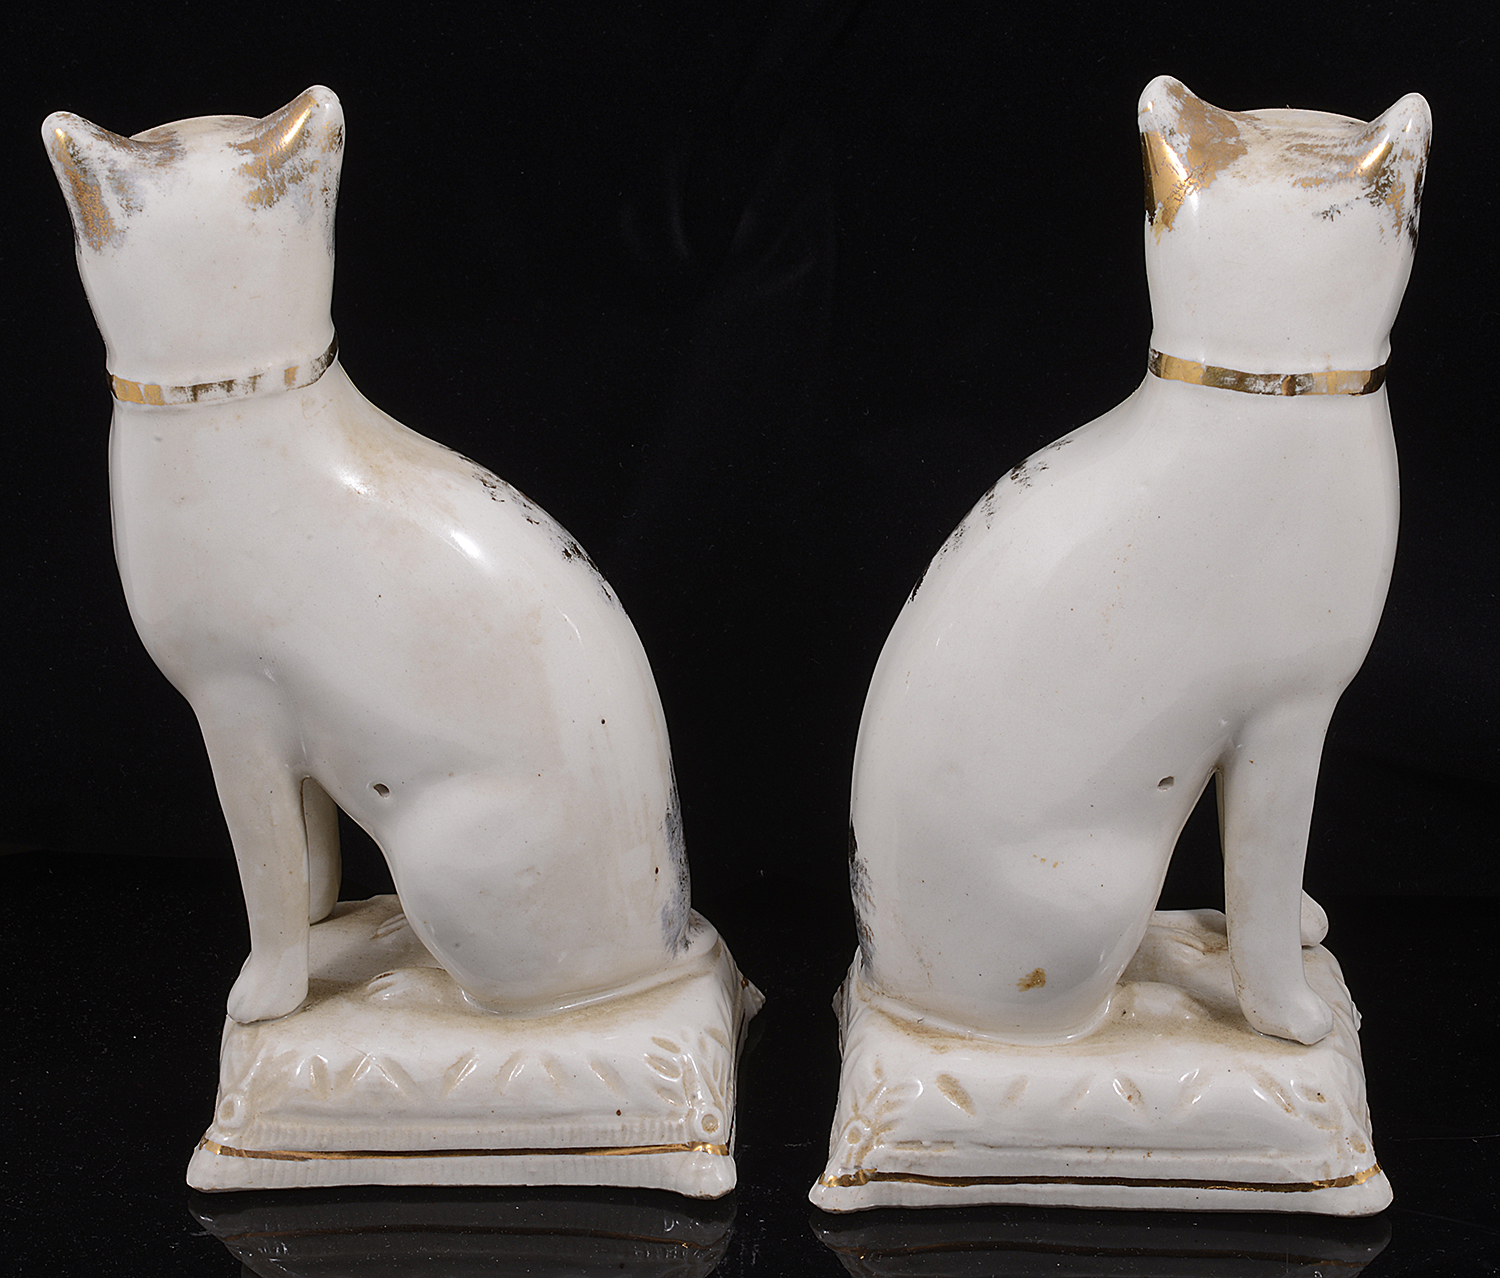 A pair of early 19th century Staffordshire pottery cats - Image 2 of 2